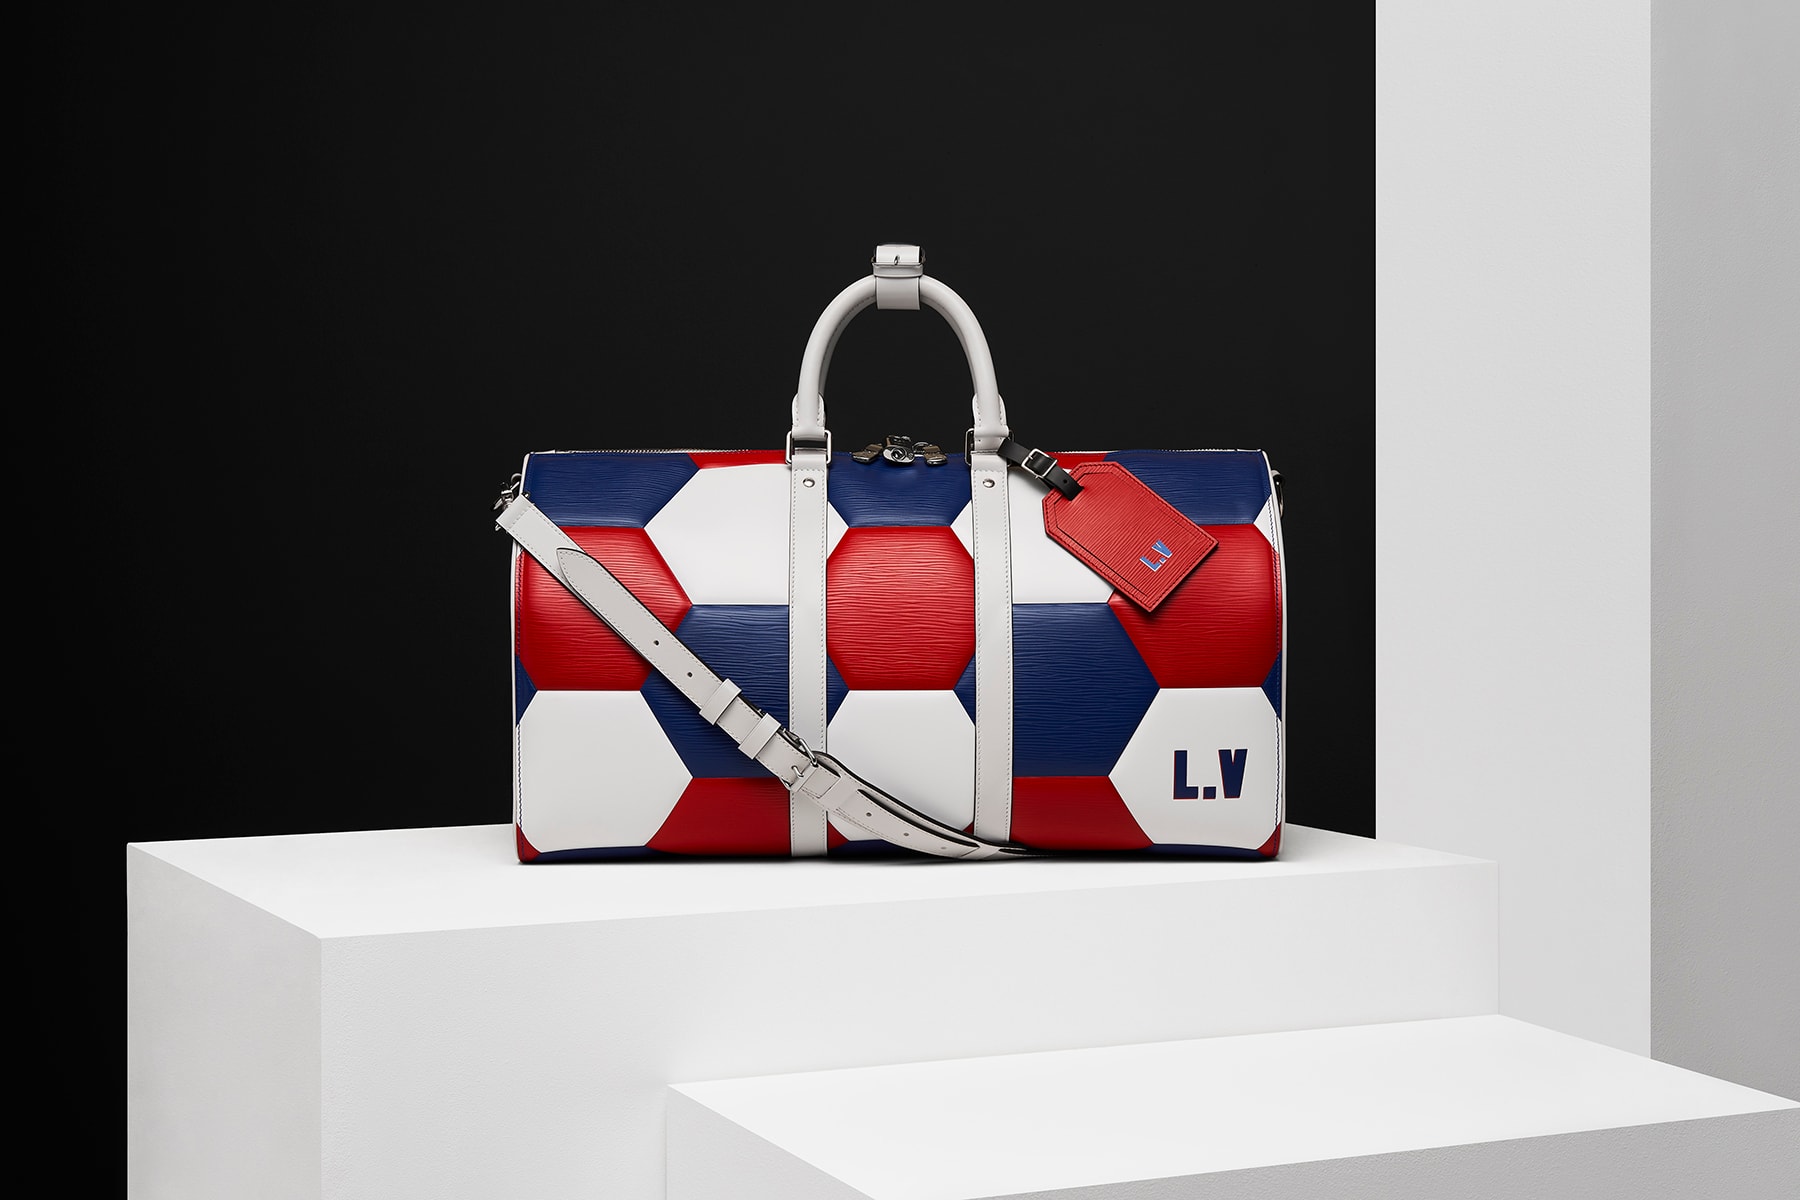 Louis Vuitton Fifa 2018 world cup collaboration luggage bag apollo keep all wallet leather goods epi soccer football branding flag luggage tag duffel laptop case black red white blue color customizable june 14 july 17 2018 limited edition exclusive drop release info